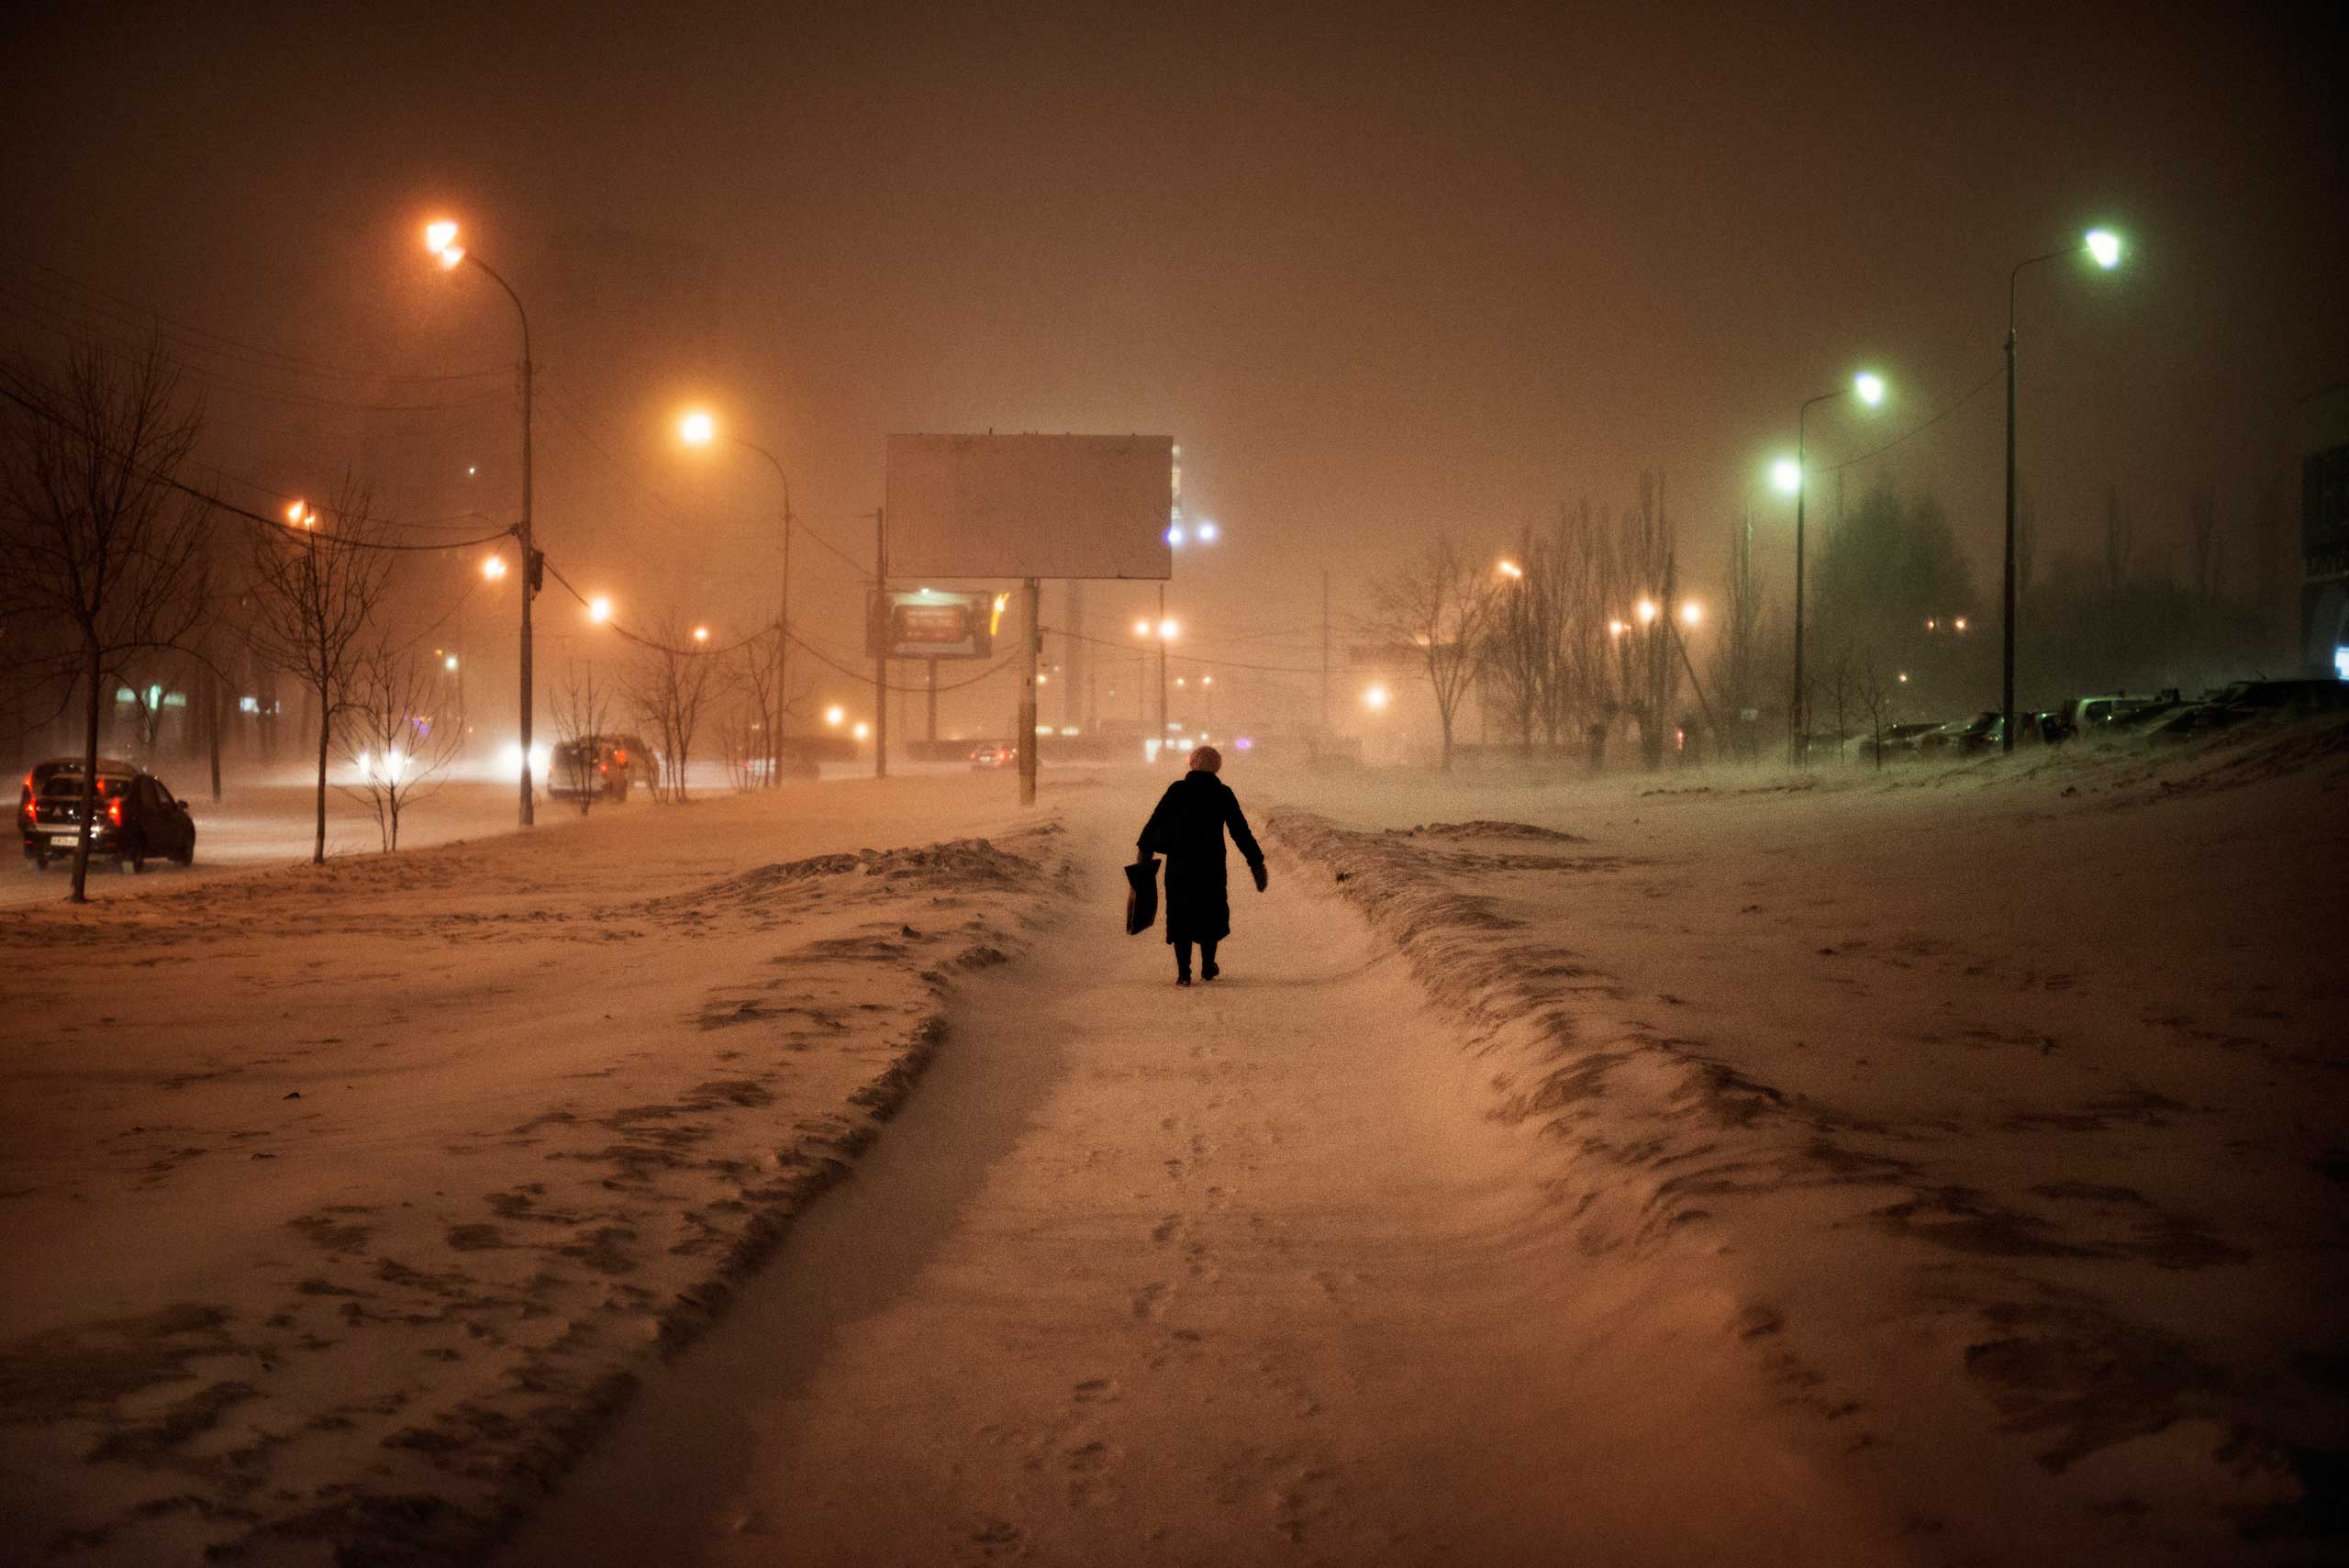 A woman walks at night on a street in Yekaterinburg during a snow storm.